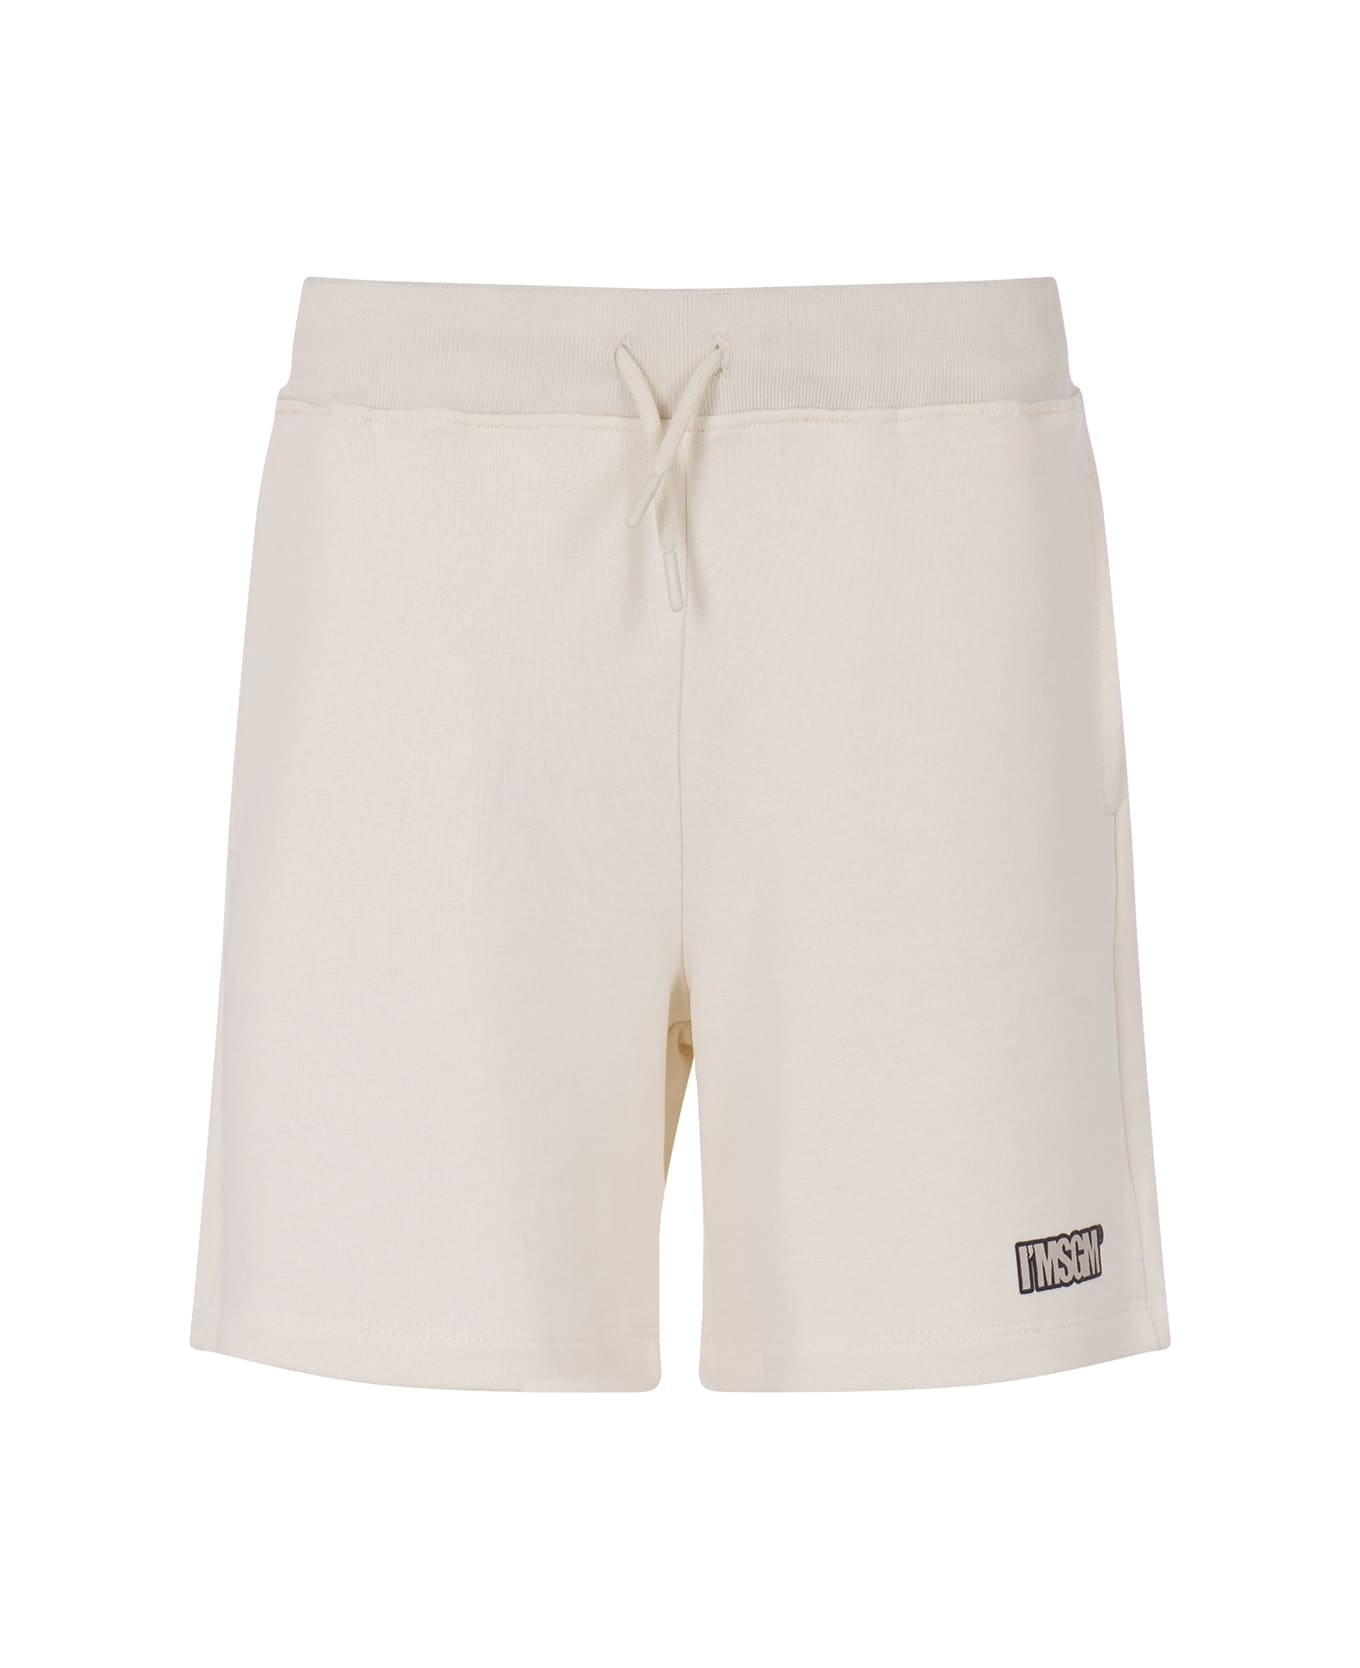 MSGM Shorts With Print - Beige ボトムス